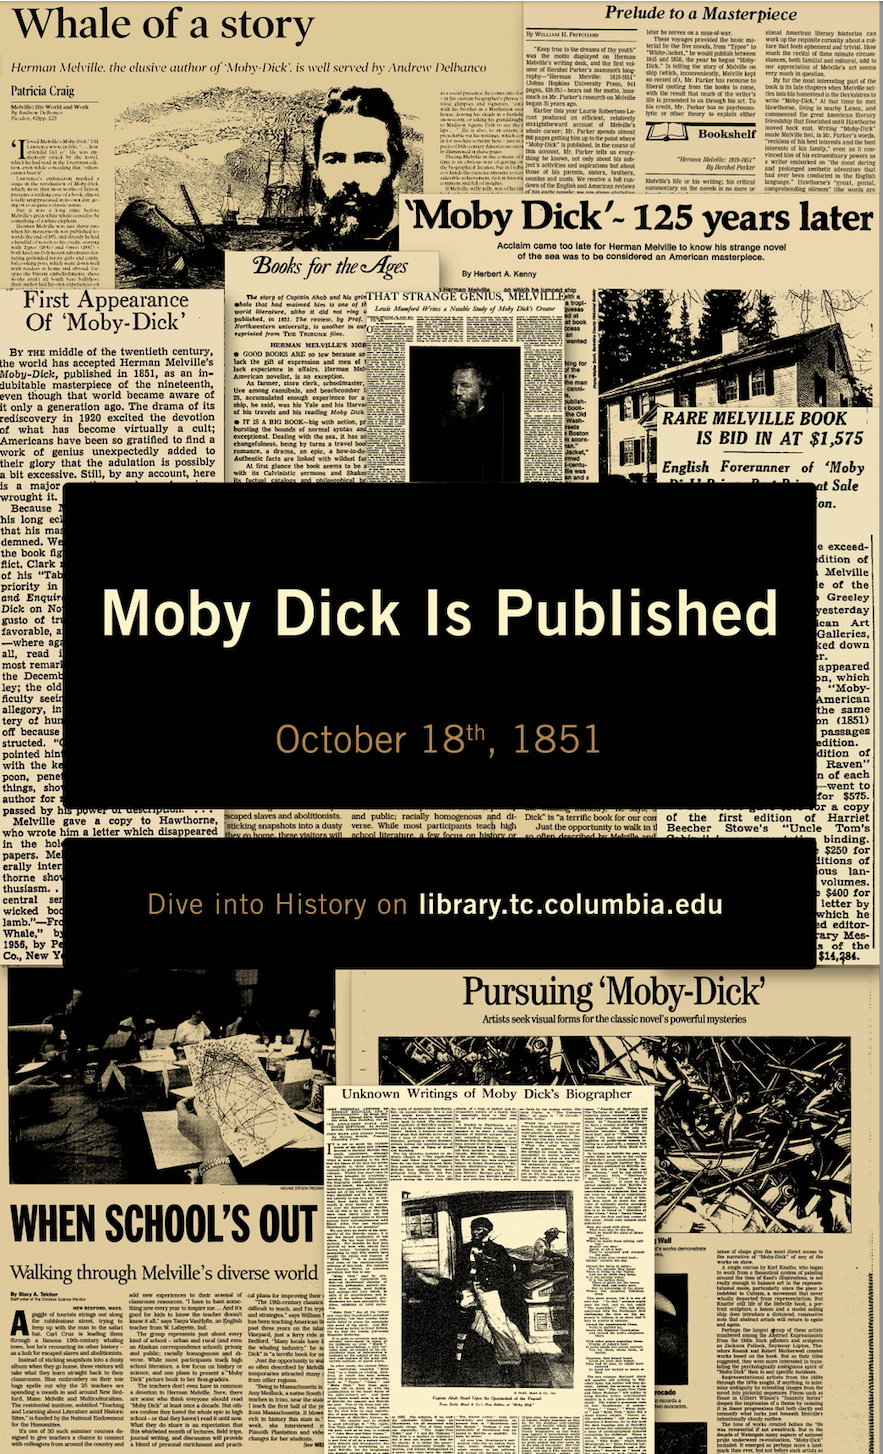 The True-Life Horror That Inspired 'Moby-Dick', History